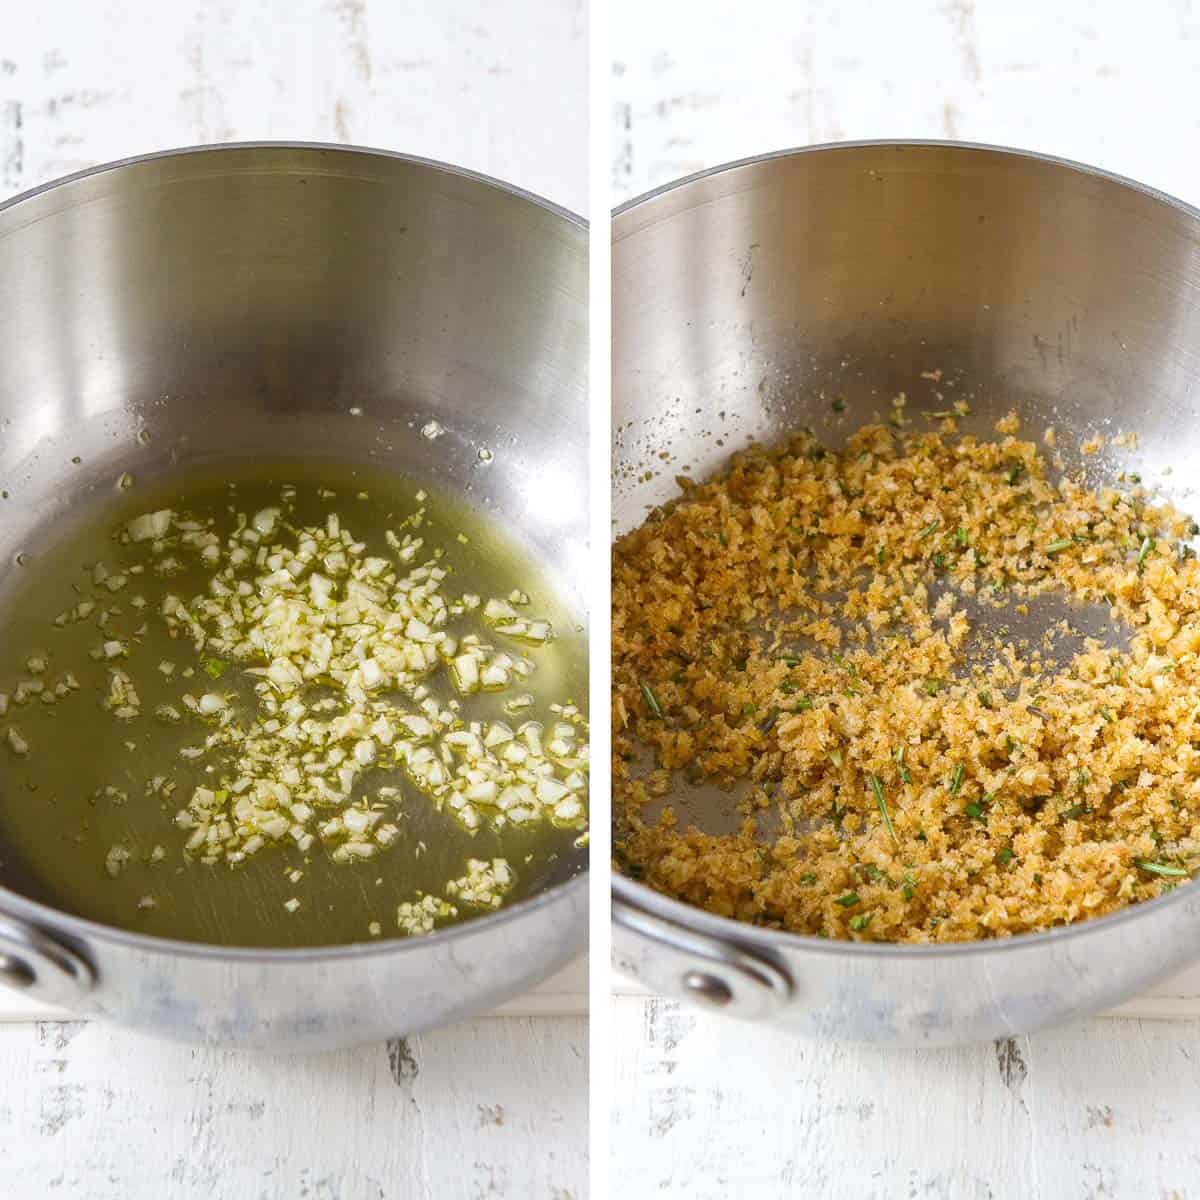 Garlic in olive oil and breadcrumb mixture in a saucepan.